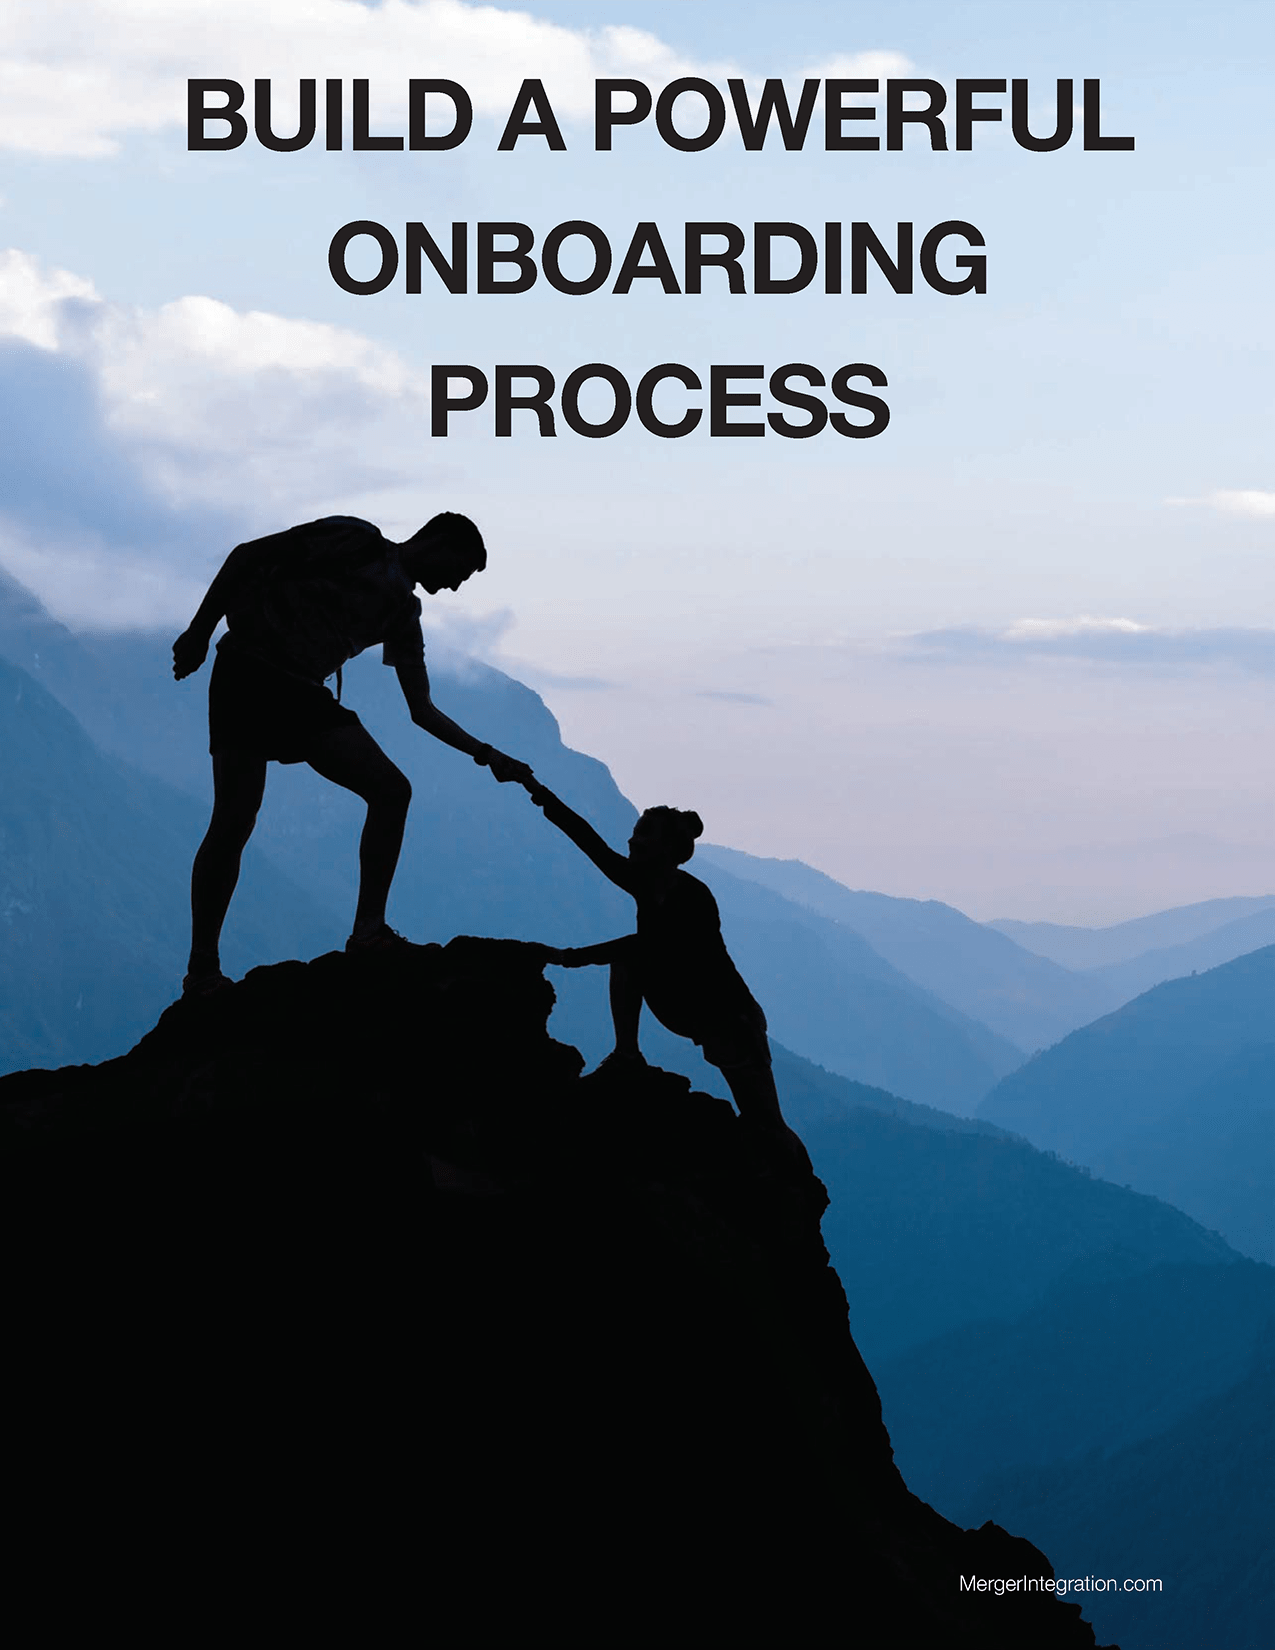 Build a Powerful Onboarding Process